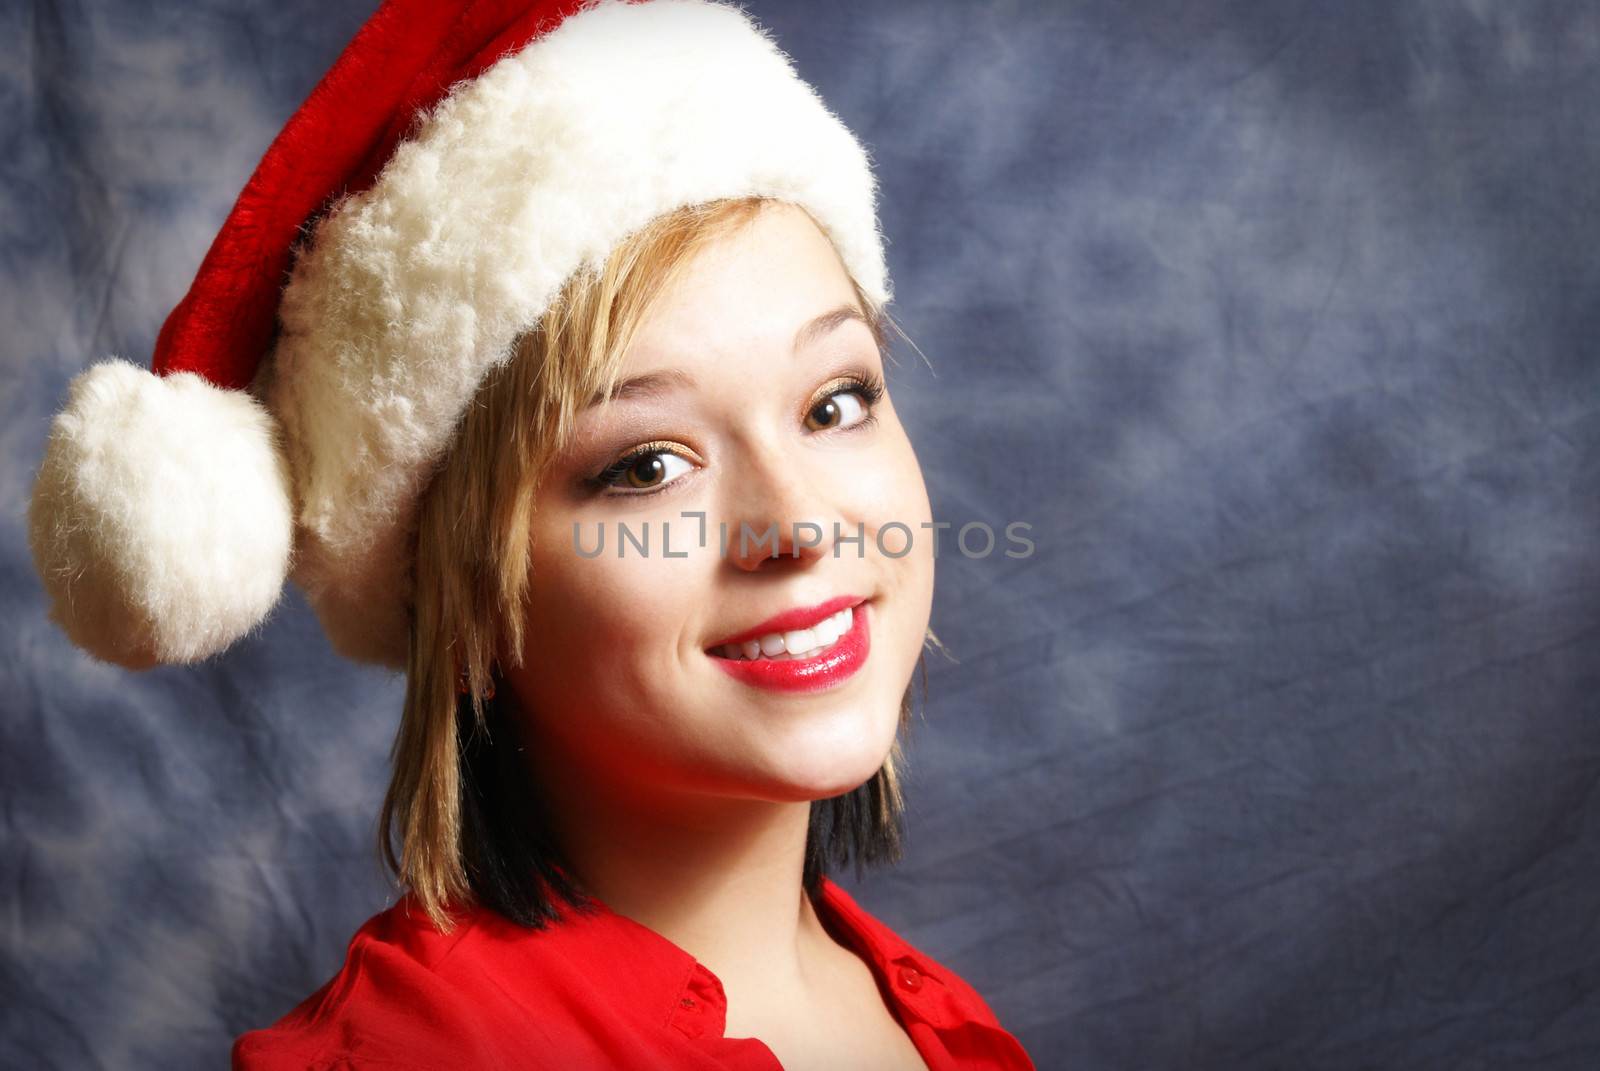 A happy young woman wearing a santa hat for the spirit of Christmas.